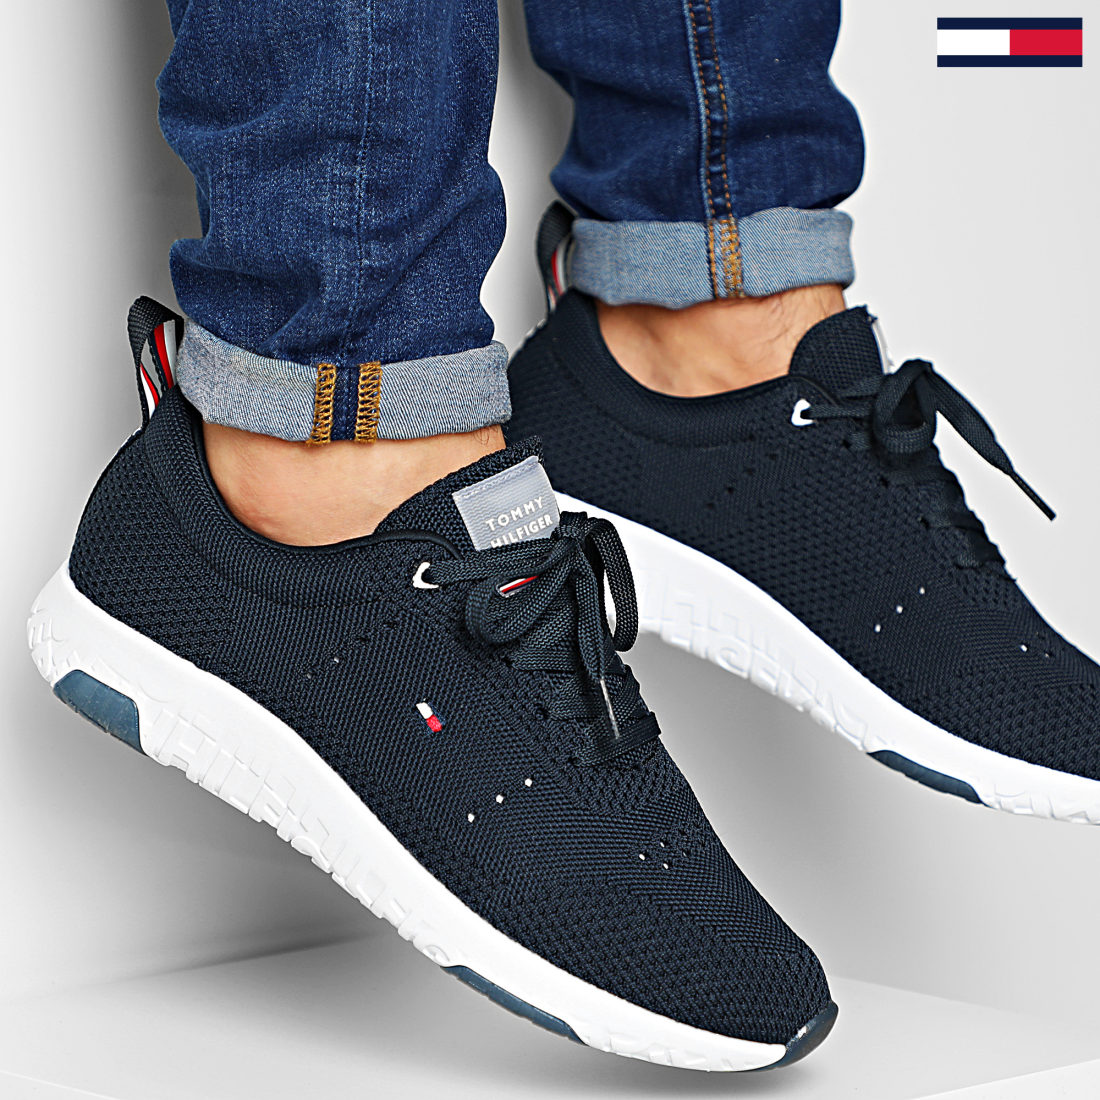 Tommy Hilfiger Logo Knit Sock Sneakers in Black - BAMBINIFASHION.COM